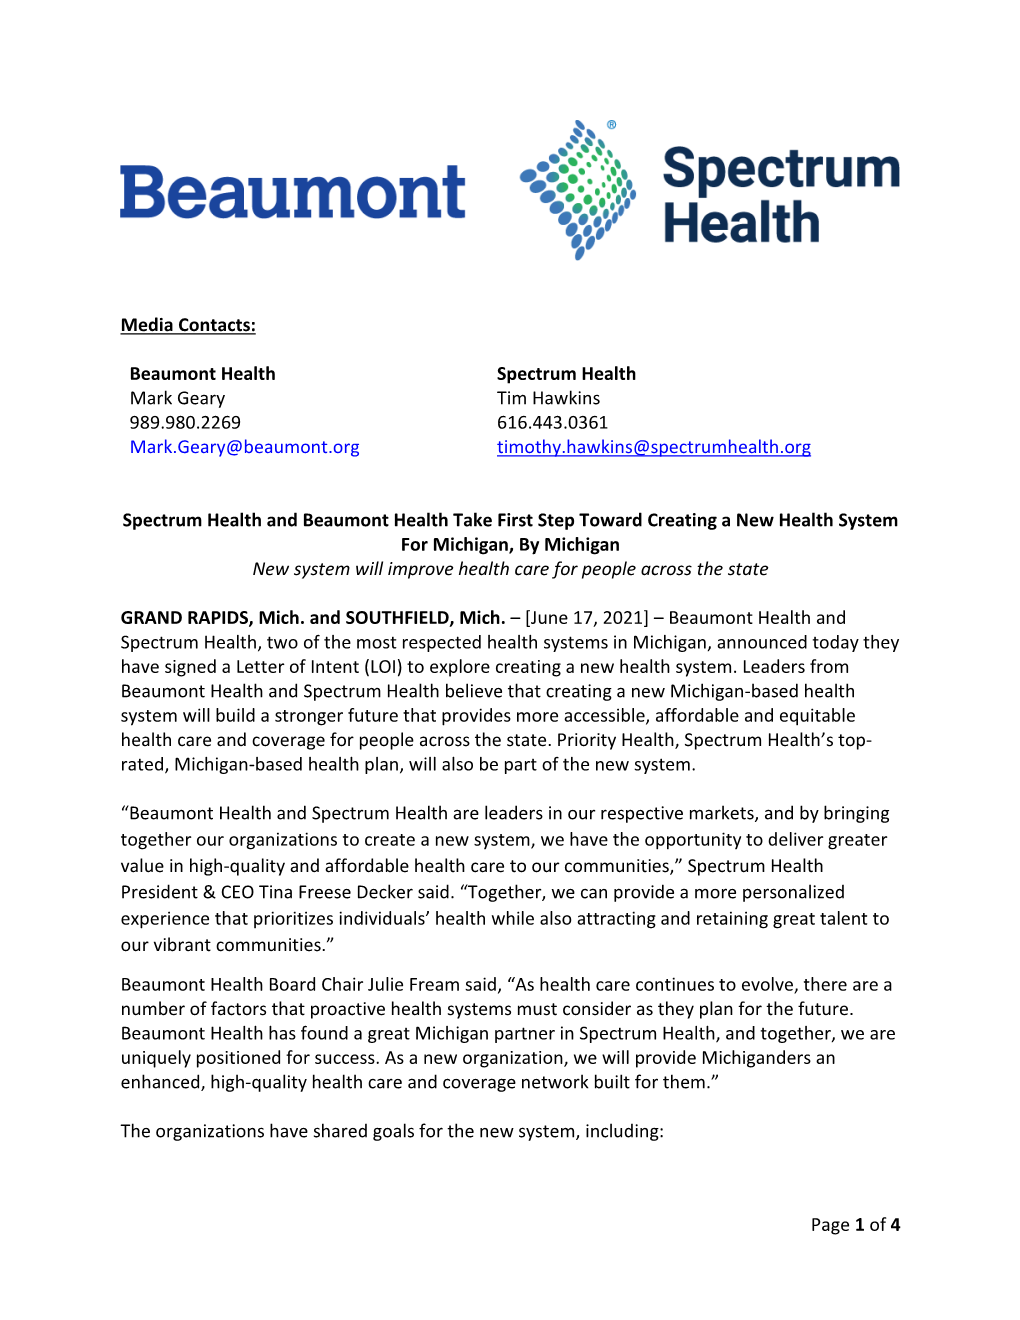 Page 1 of 4 Media Contacts: Beaumont Health Mark Geary